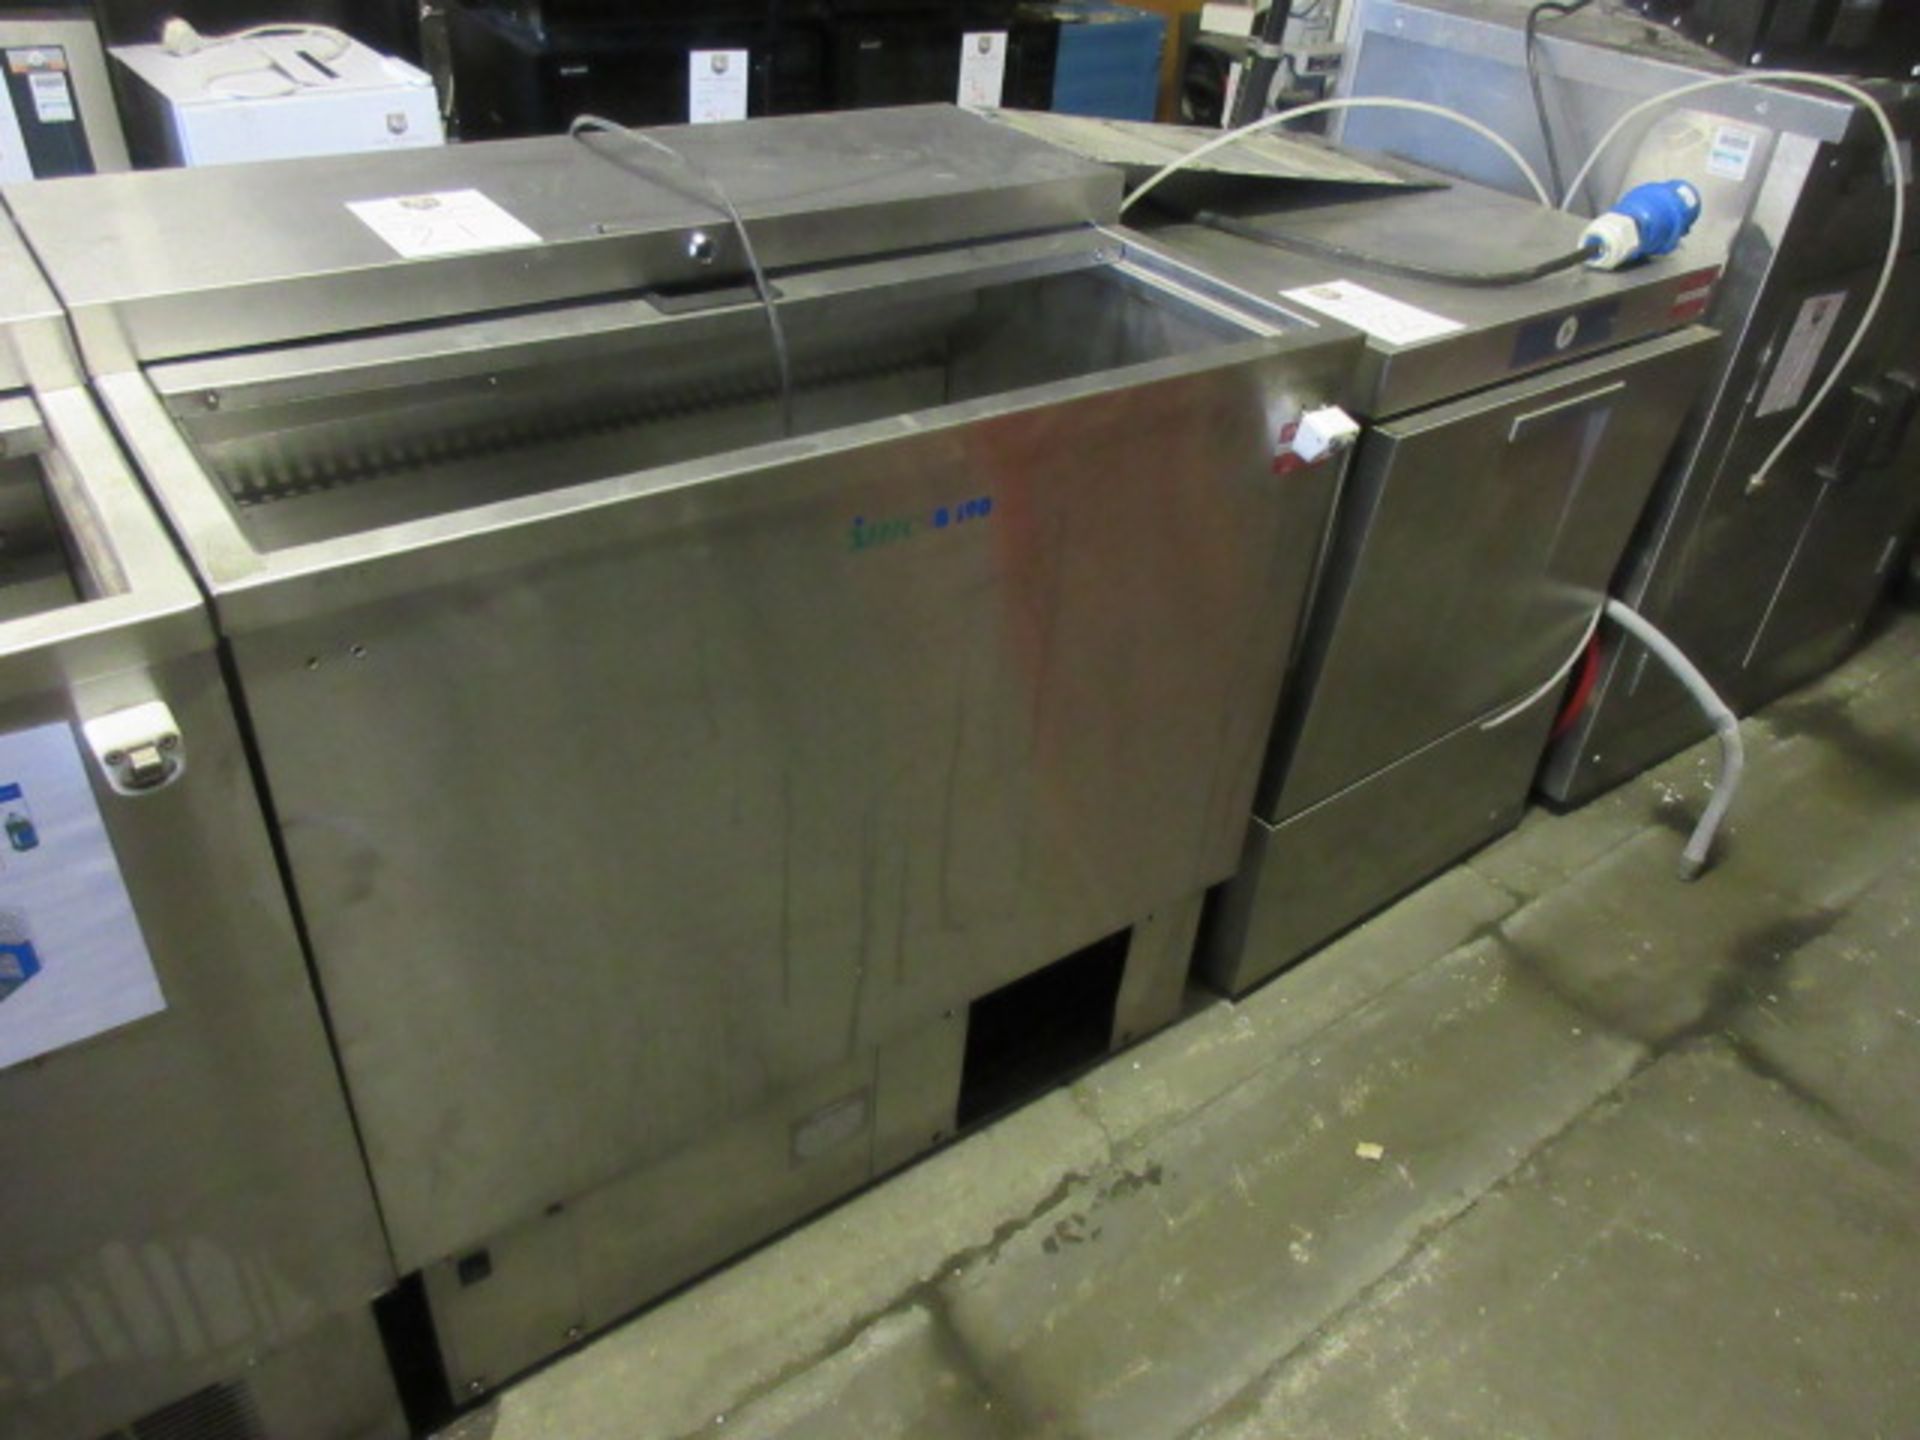 IMC B190 Chest Chiller. Stainless Steel, Refrigerant 134A, size 900 x 620 x 850mm high